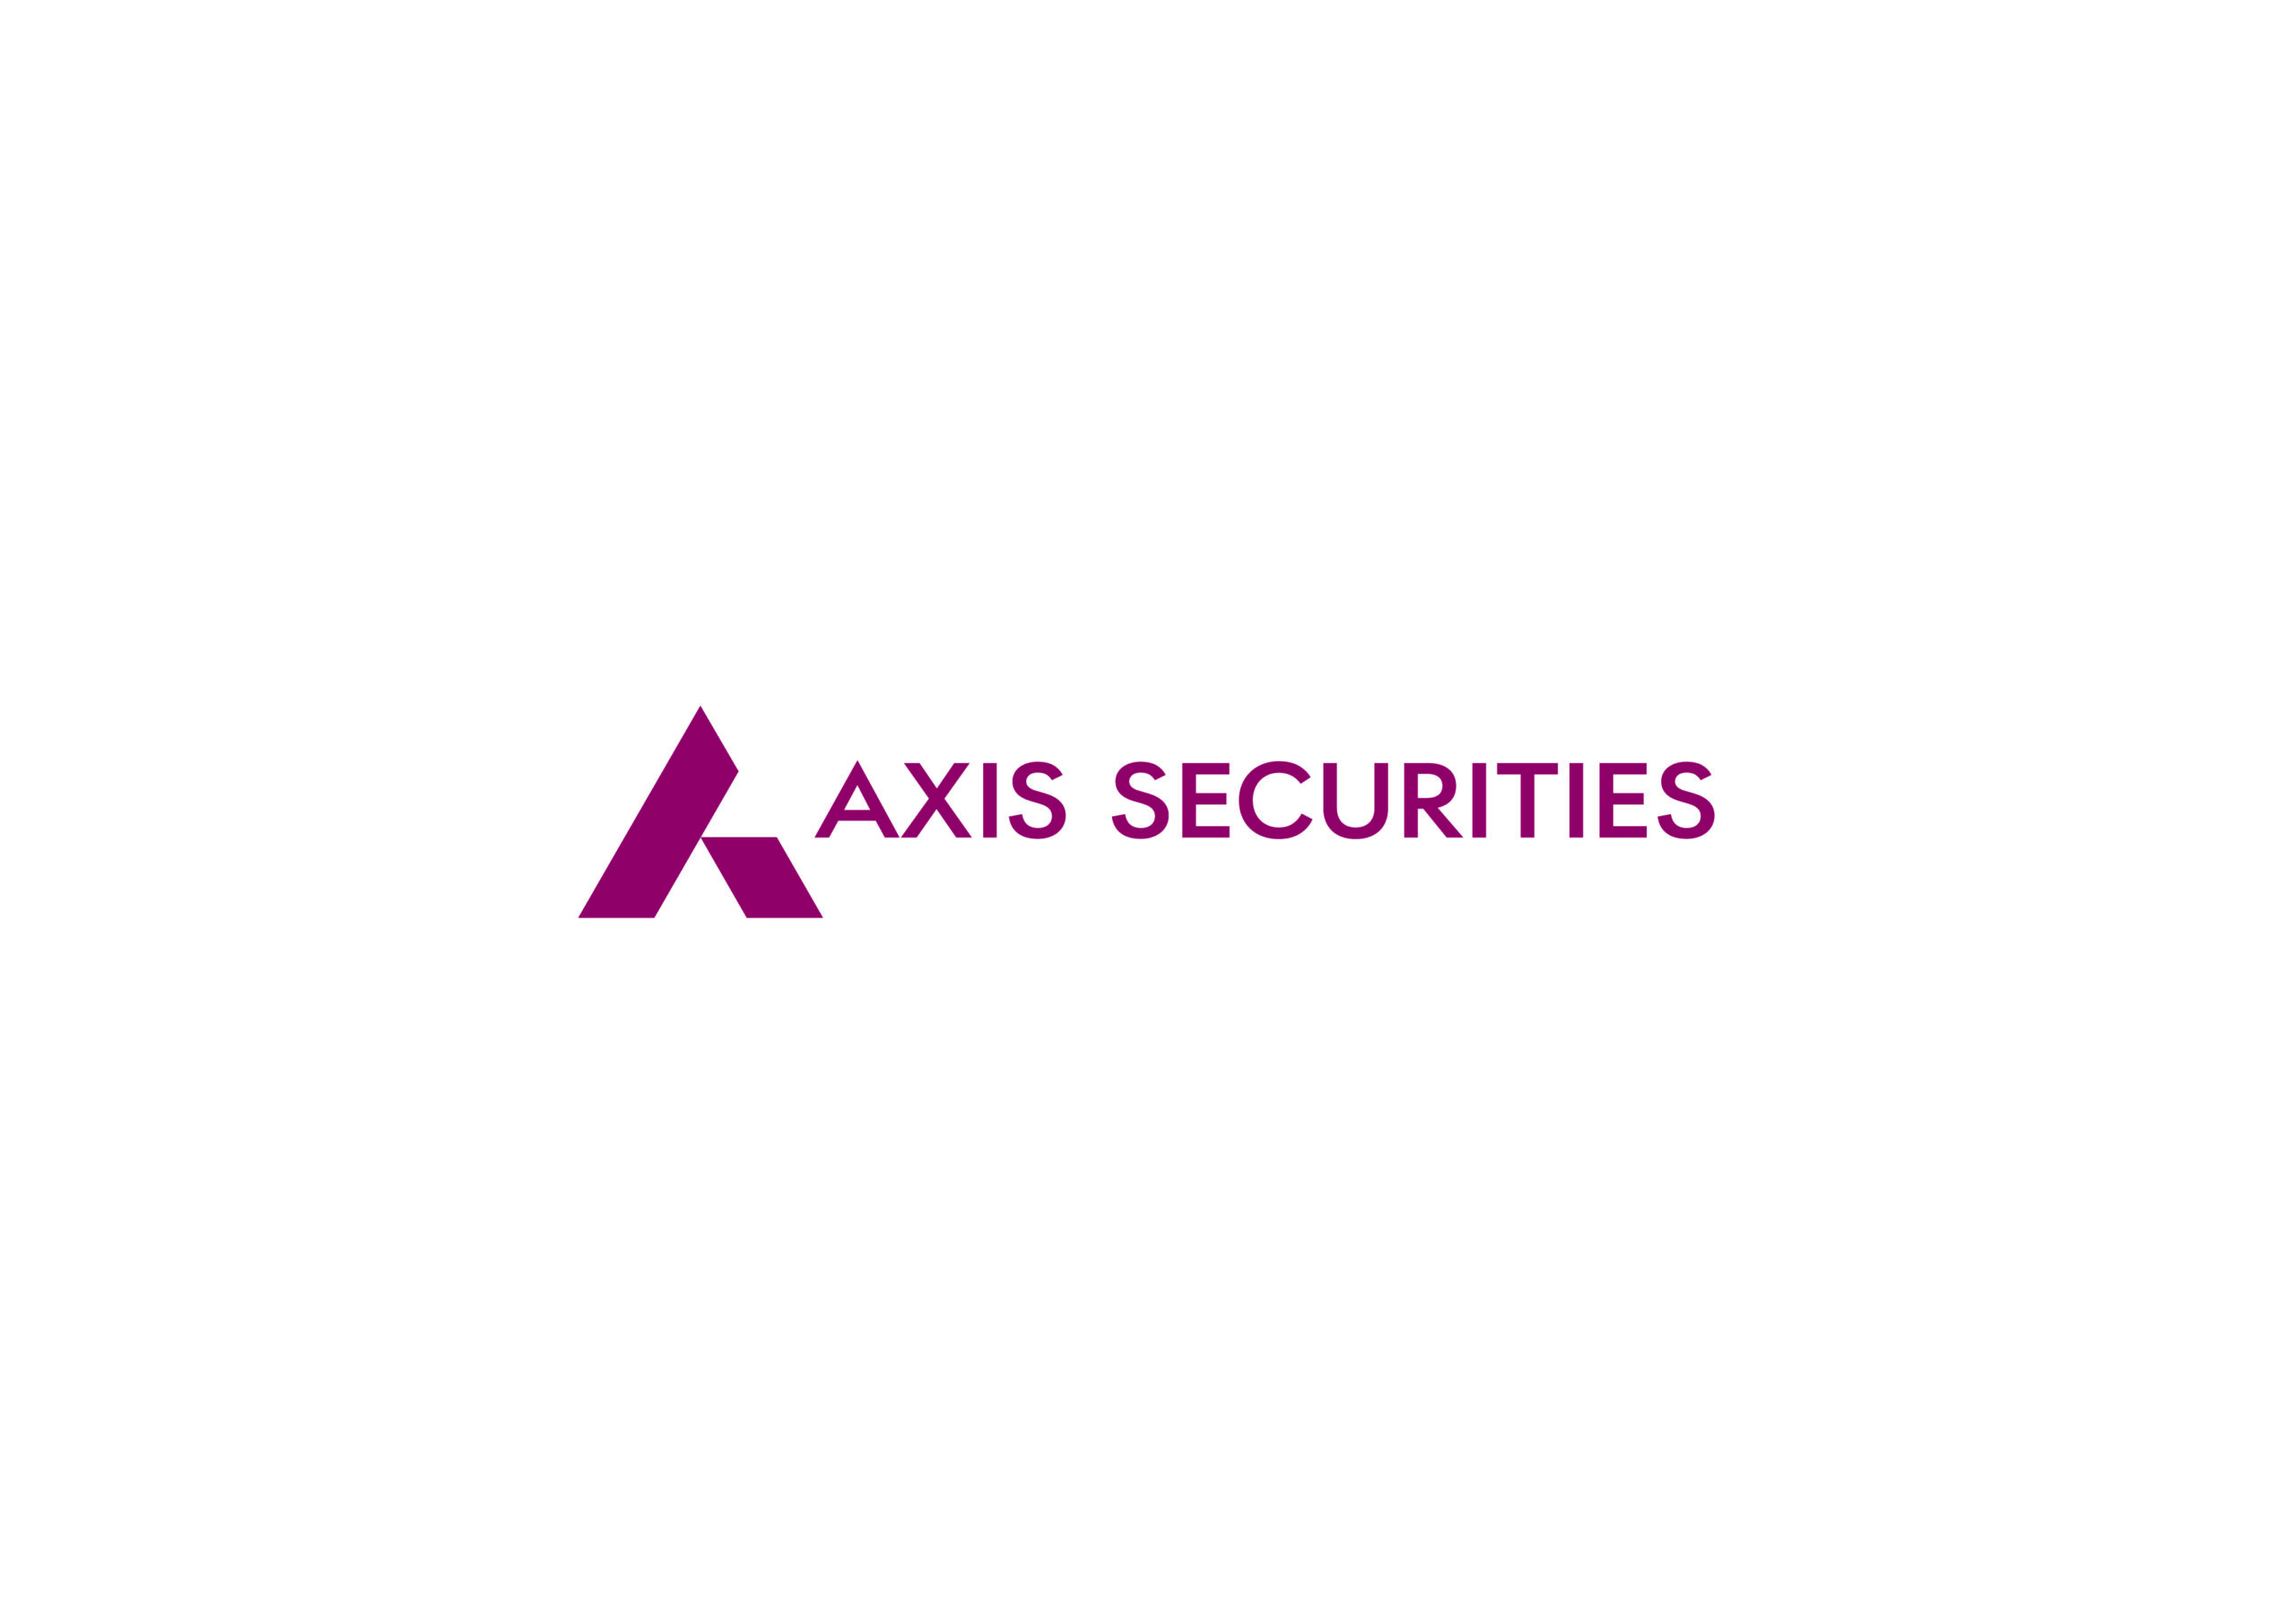 Axis Securities appoints Pranav Haridasan as MD and CEO